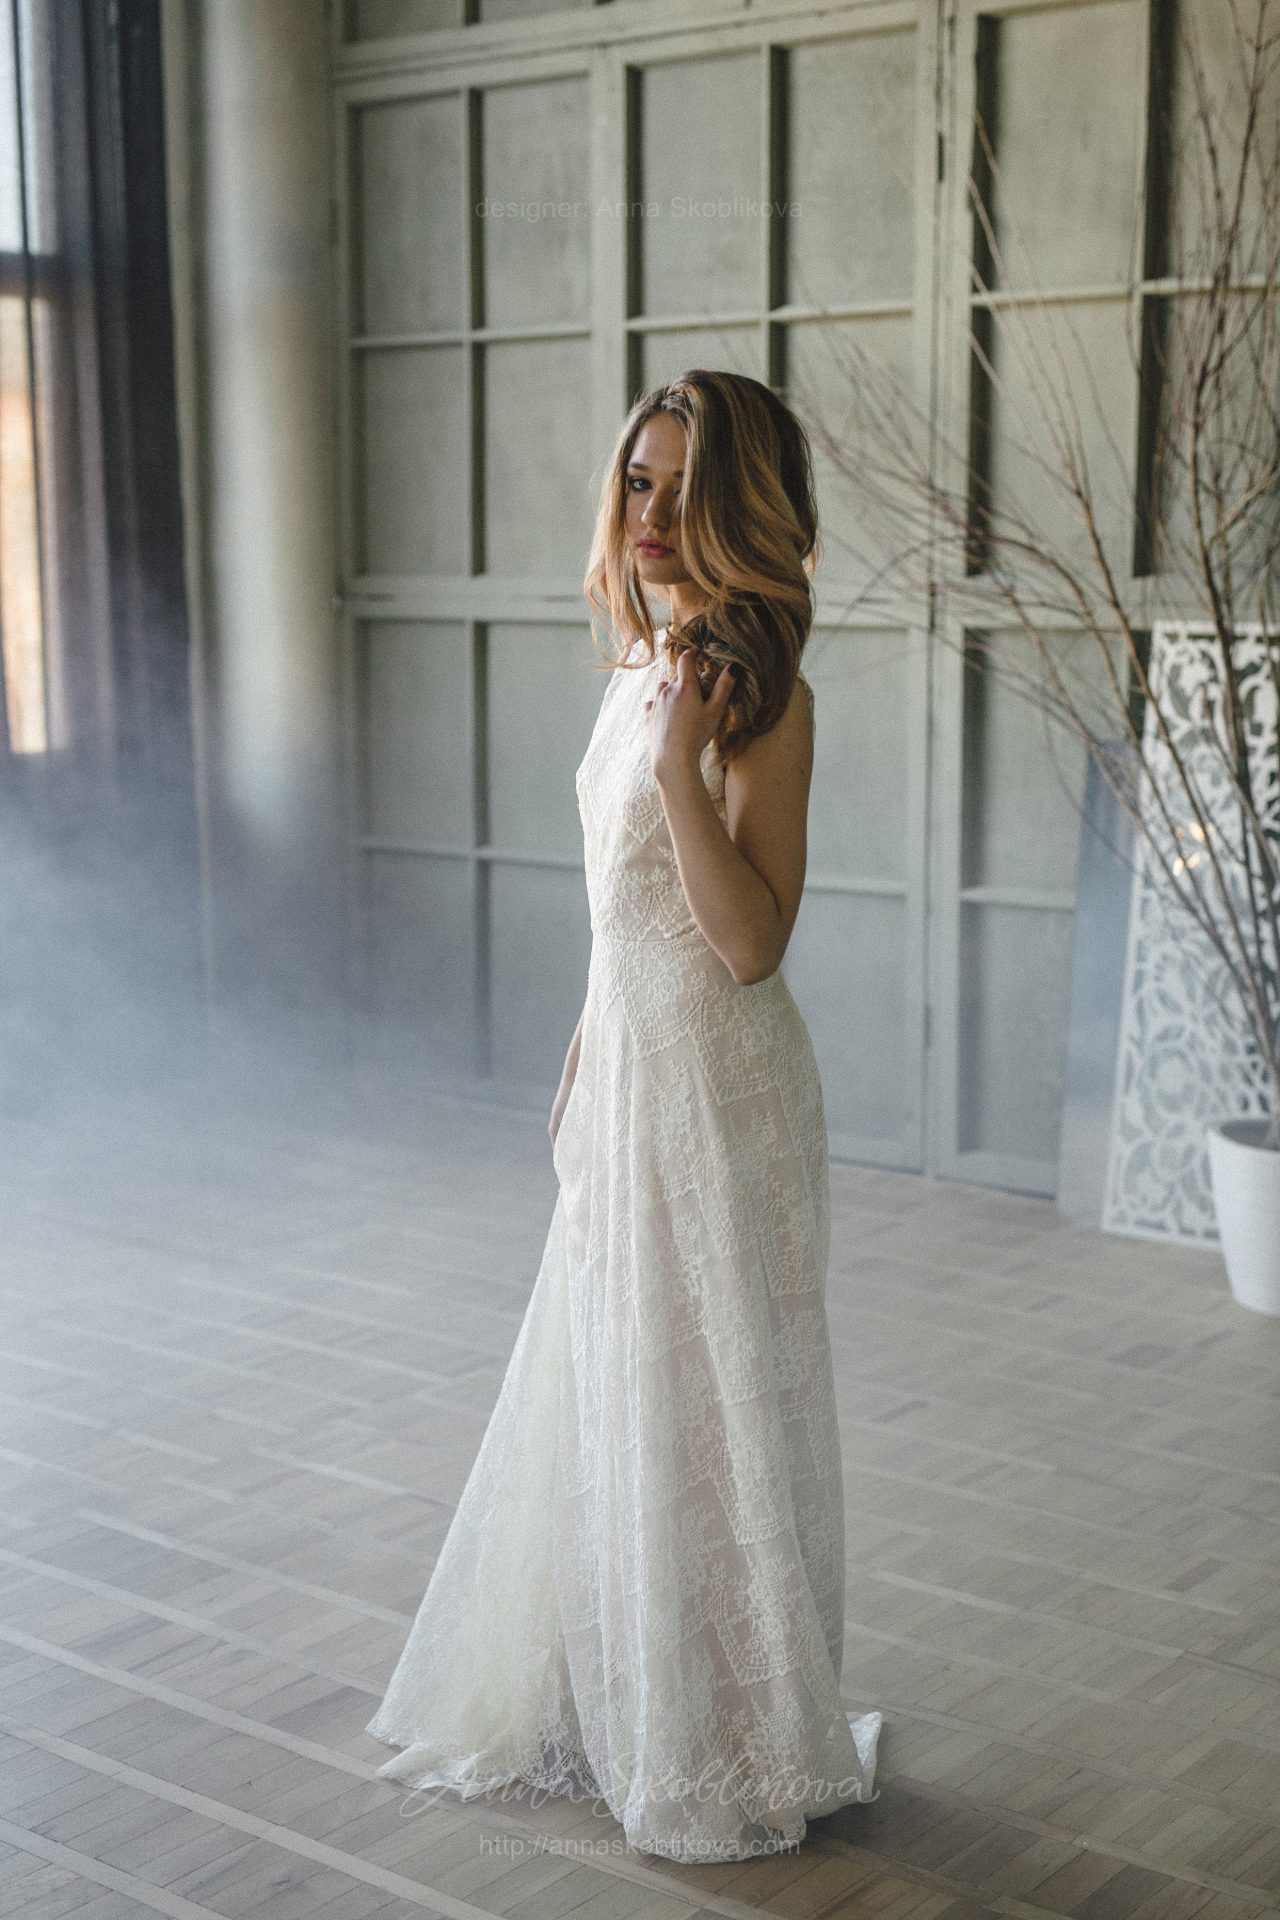 Champagne lace wedding dress with open back | Wedding Dresses & Evening ...